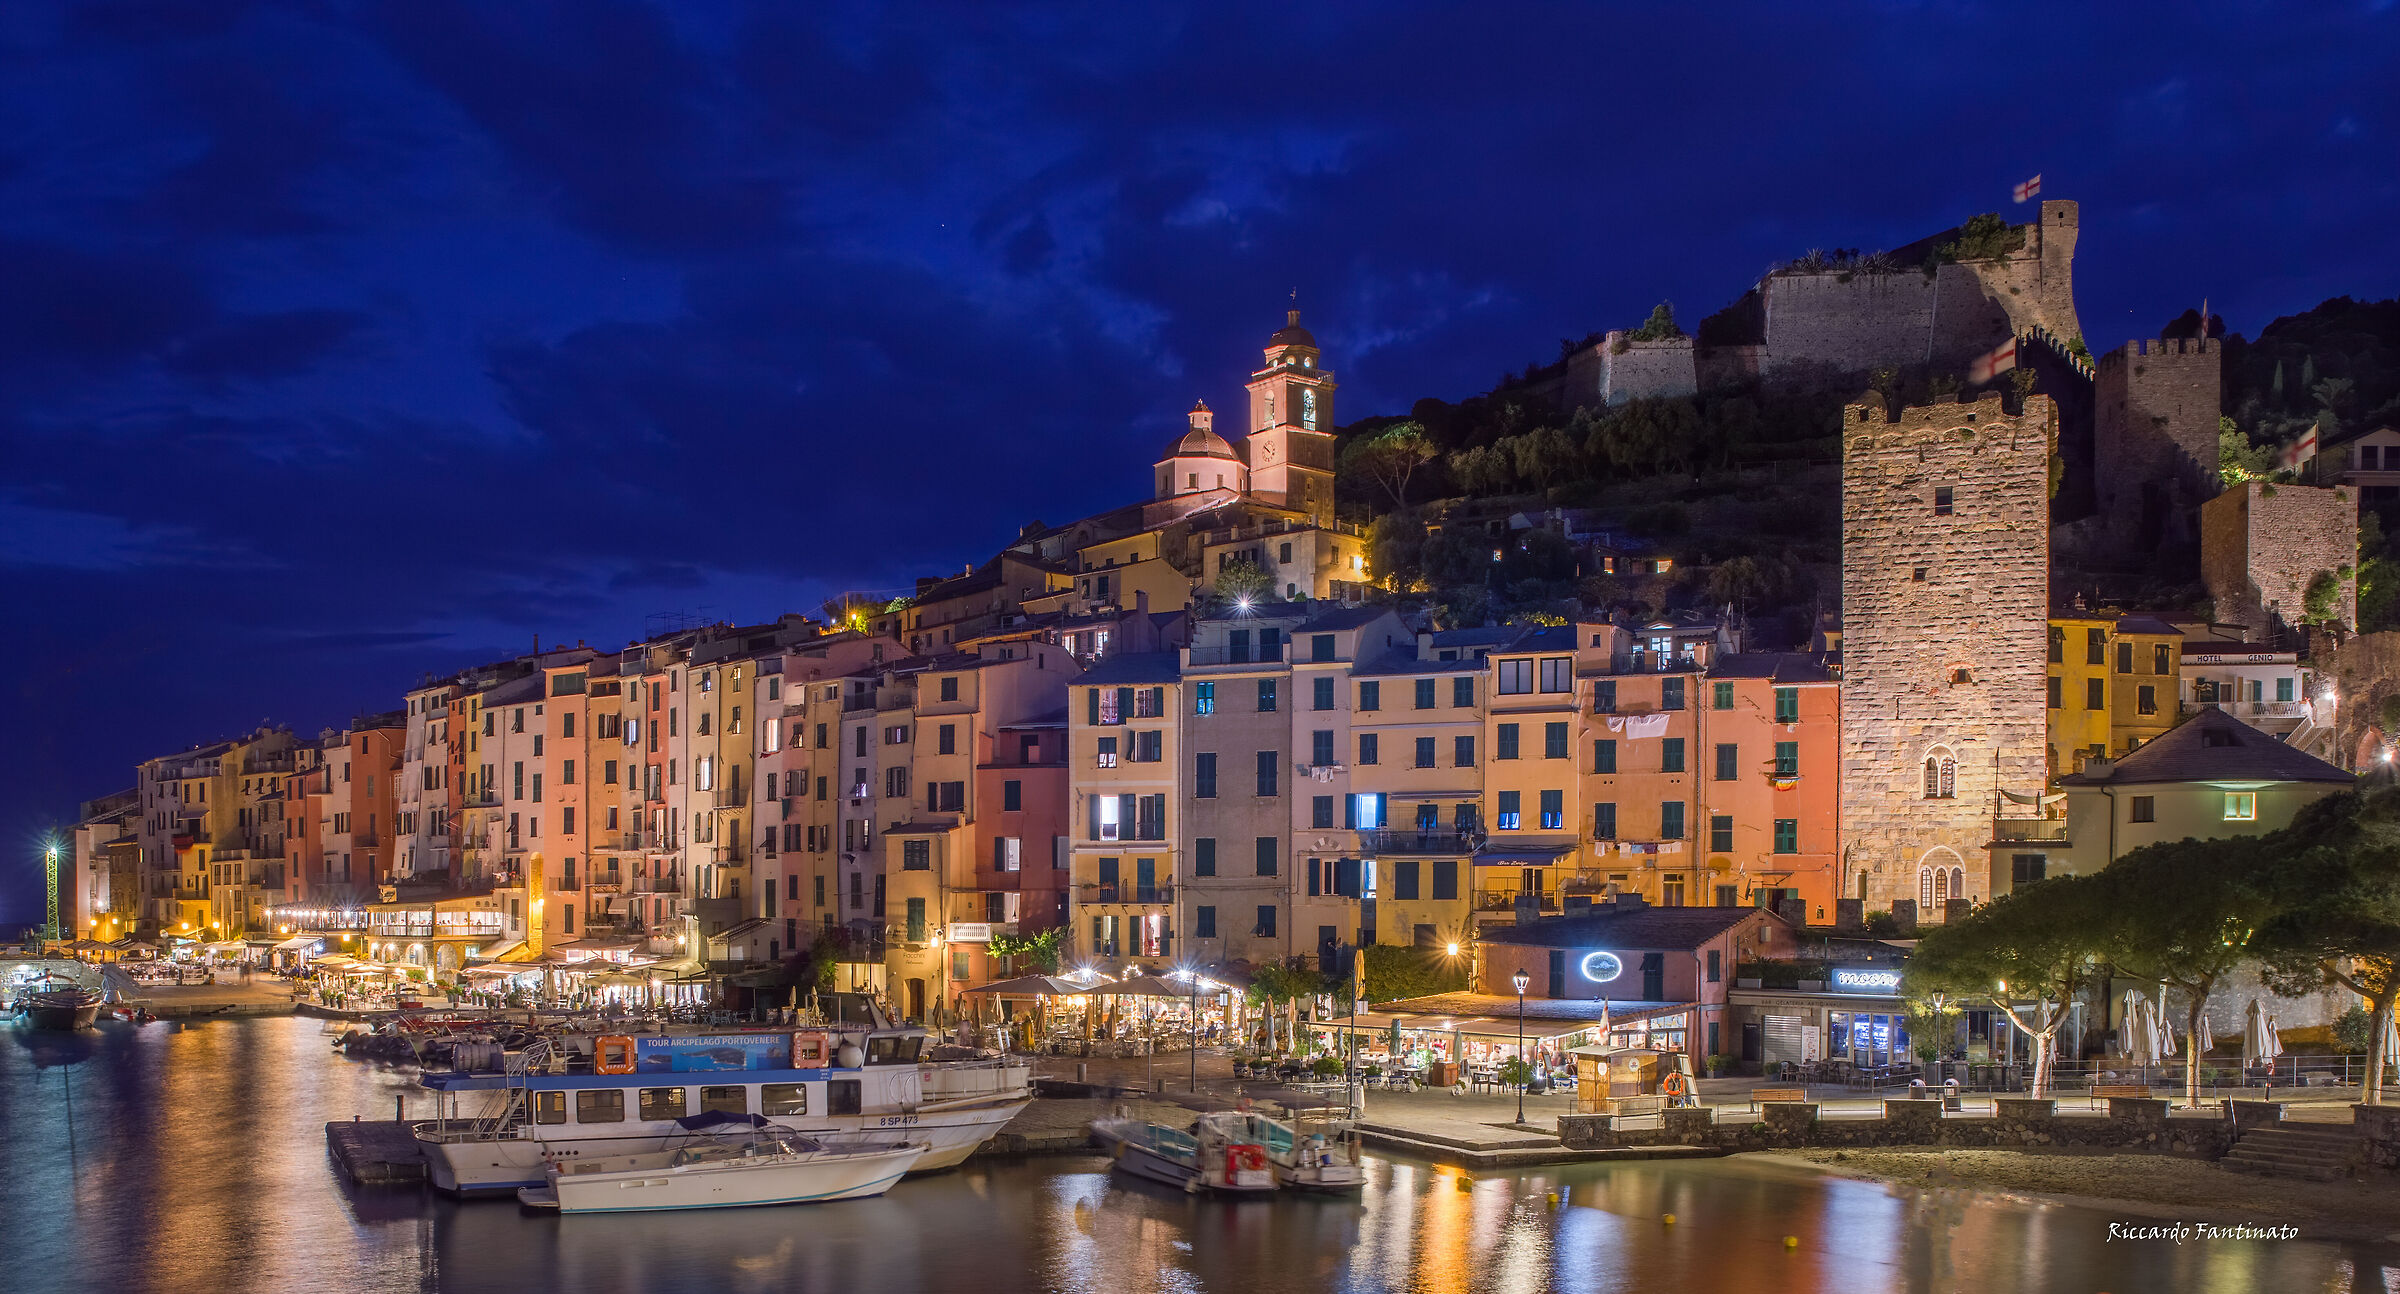 Portovenere ... in evening dress and ready for Summer ...